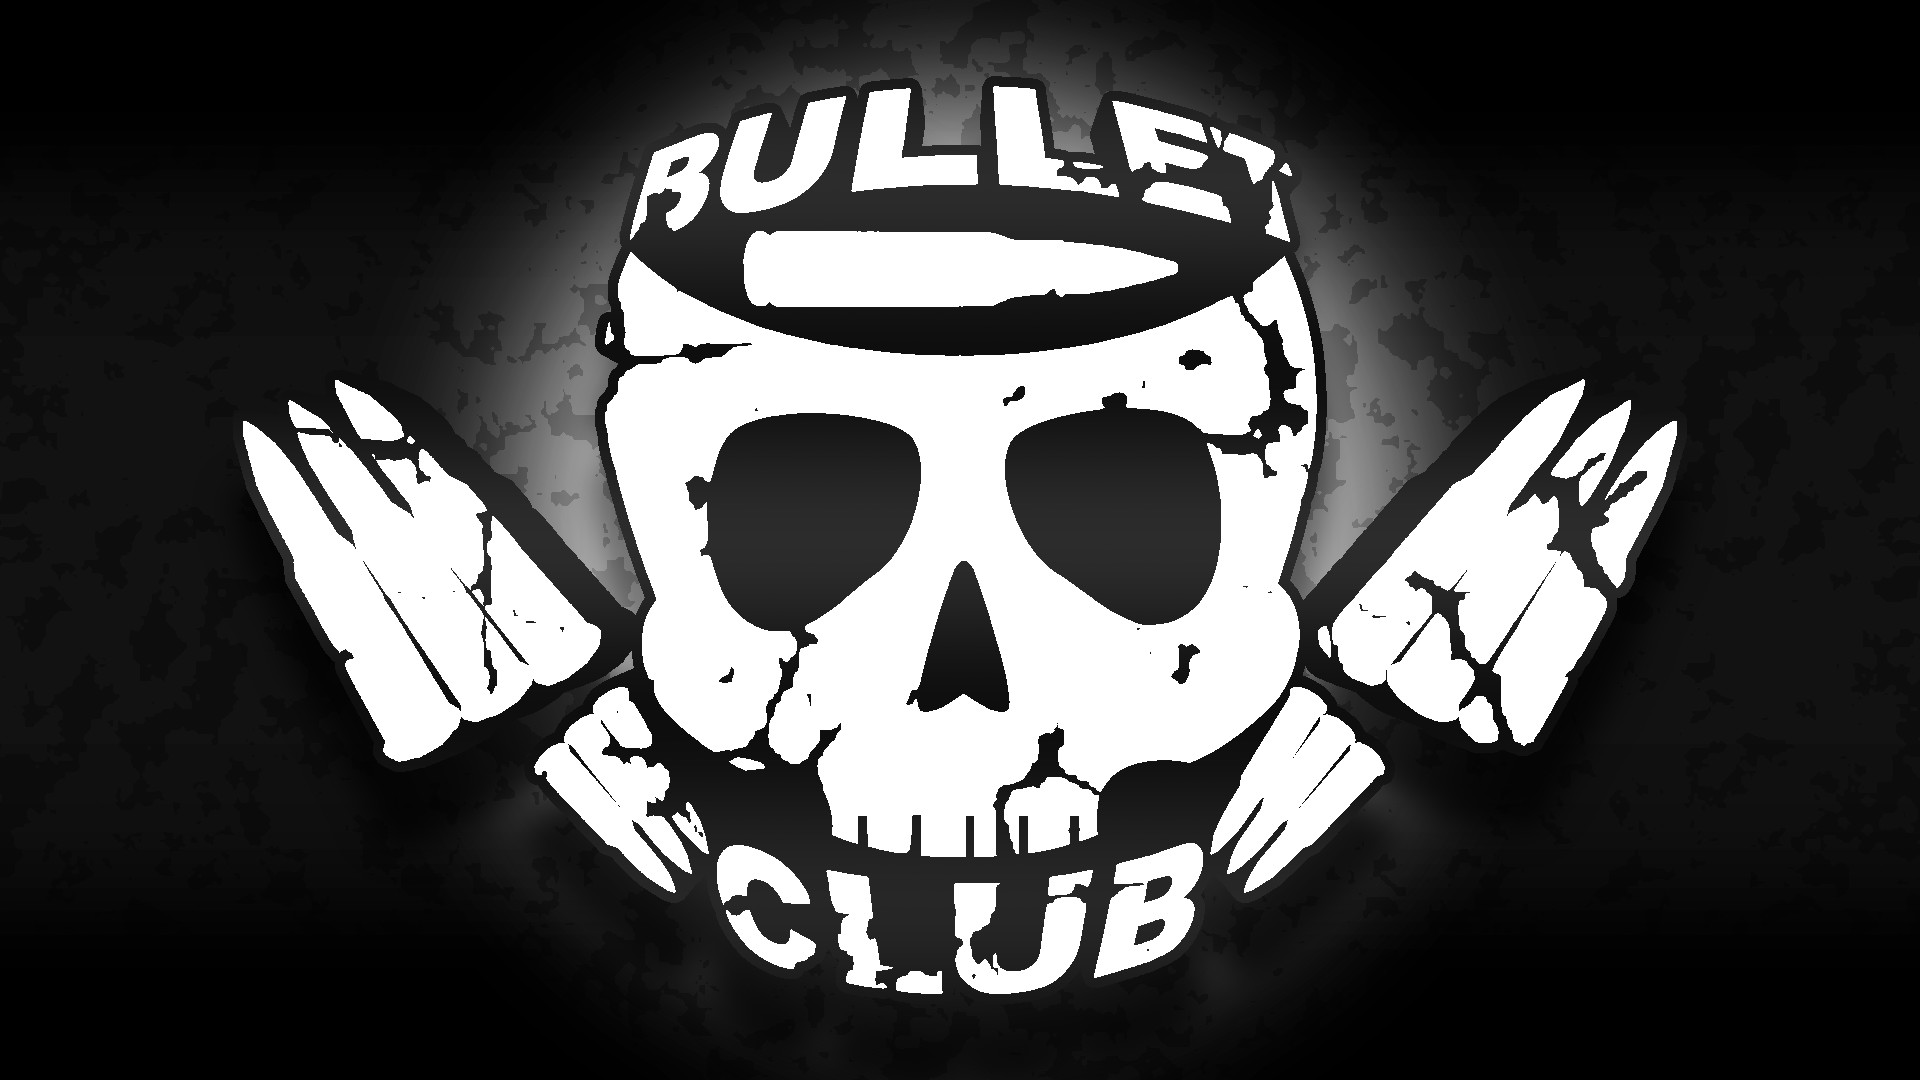 1920x1080 Another Bullet Club Founding Member Re-Signs with New Japan Pro Wrestling